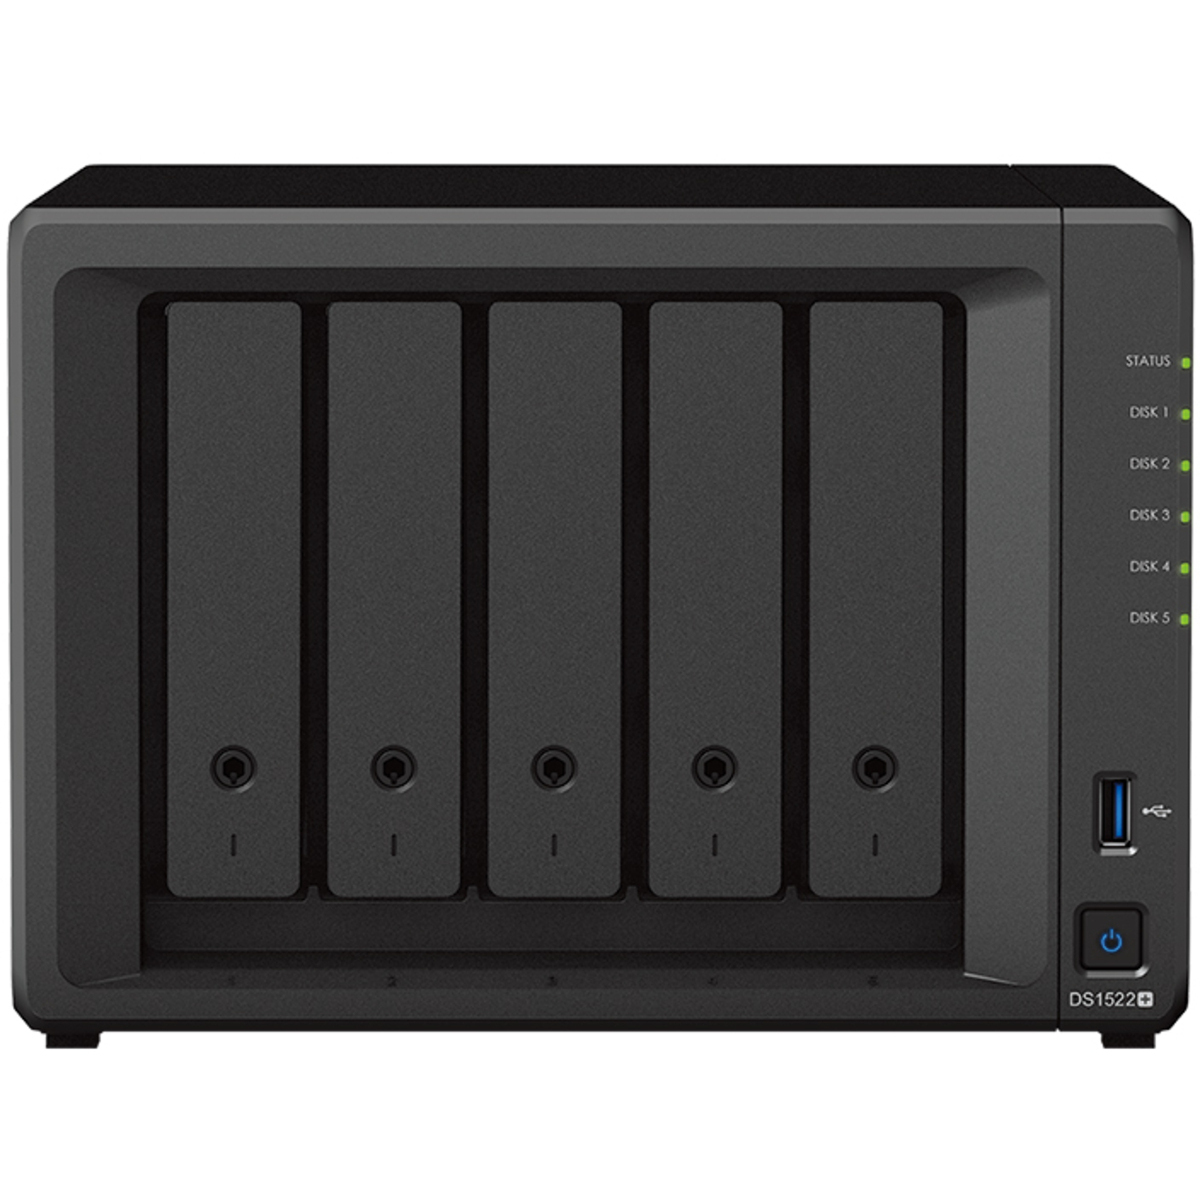 Synology DiskStation DS1522+ 90tb 5-Bay Desktop Multimedia / Power User / Business NAS - Network Attached Storage Device 5x18tb Seagate EXOS X18 ST18000NM000J 3.5 7200rpm SATA 6Gb/s HDD ENTERPRISE Class Drives Installed - Burn-In Tested - ON SALE DiskStation DS1522+